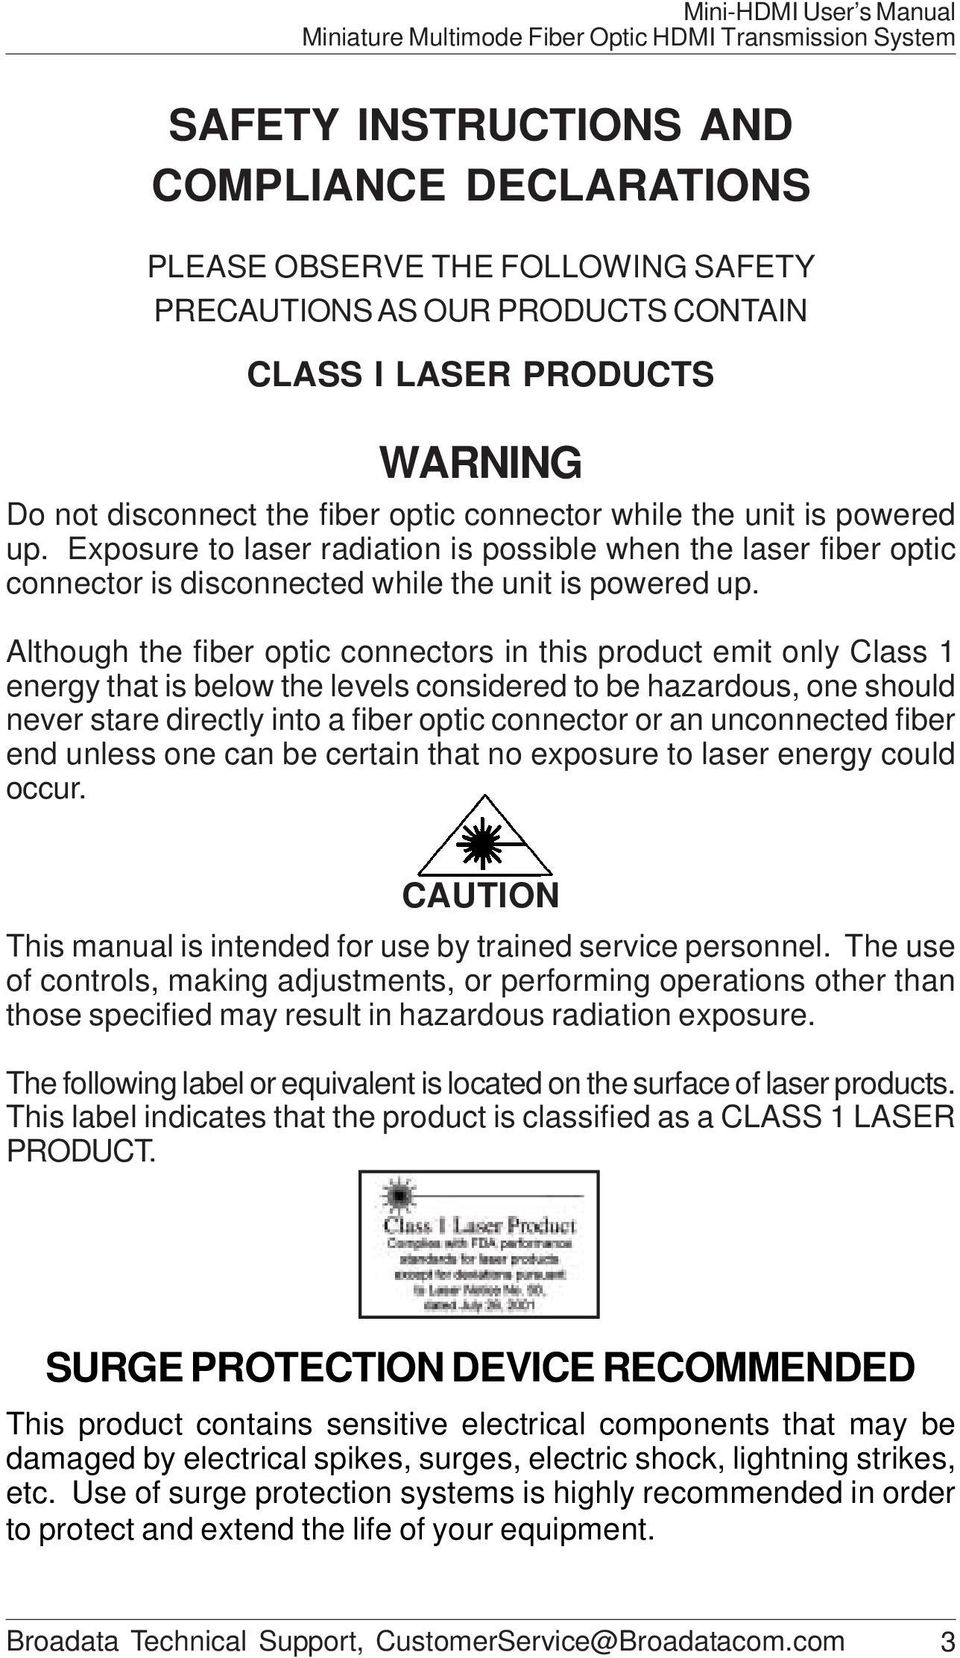 Although the fiber optic connectors in this product emit only Class 1 energy that is below the levels considered to be hazardous, one should never stare directly into a fiber optic connector or an